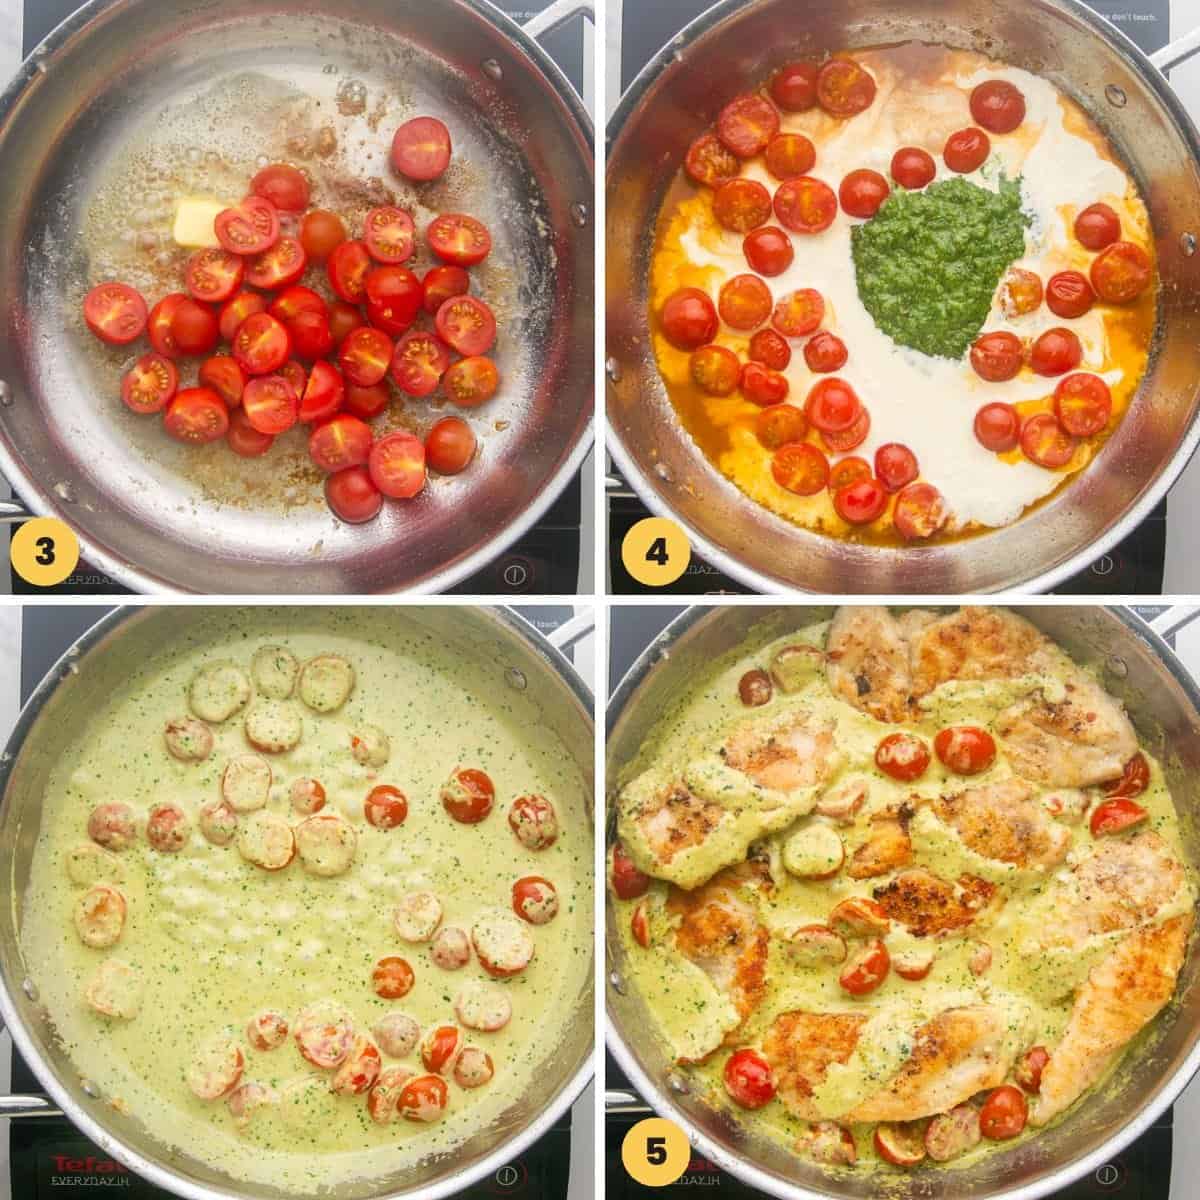 four images showing how to make a sauce with cherry tomatoes, pesto, and cream.